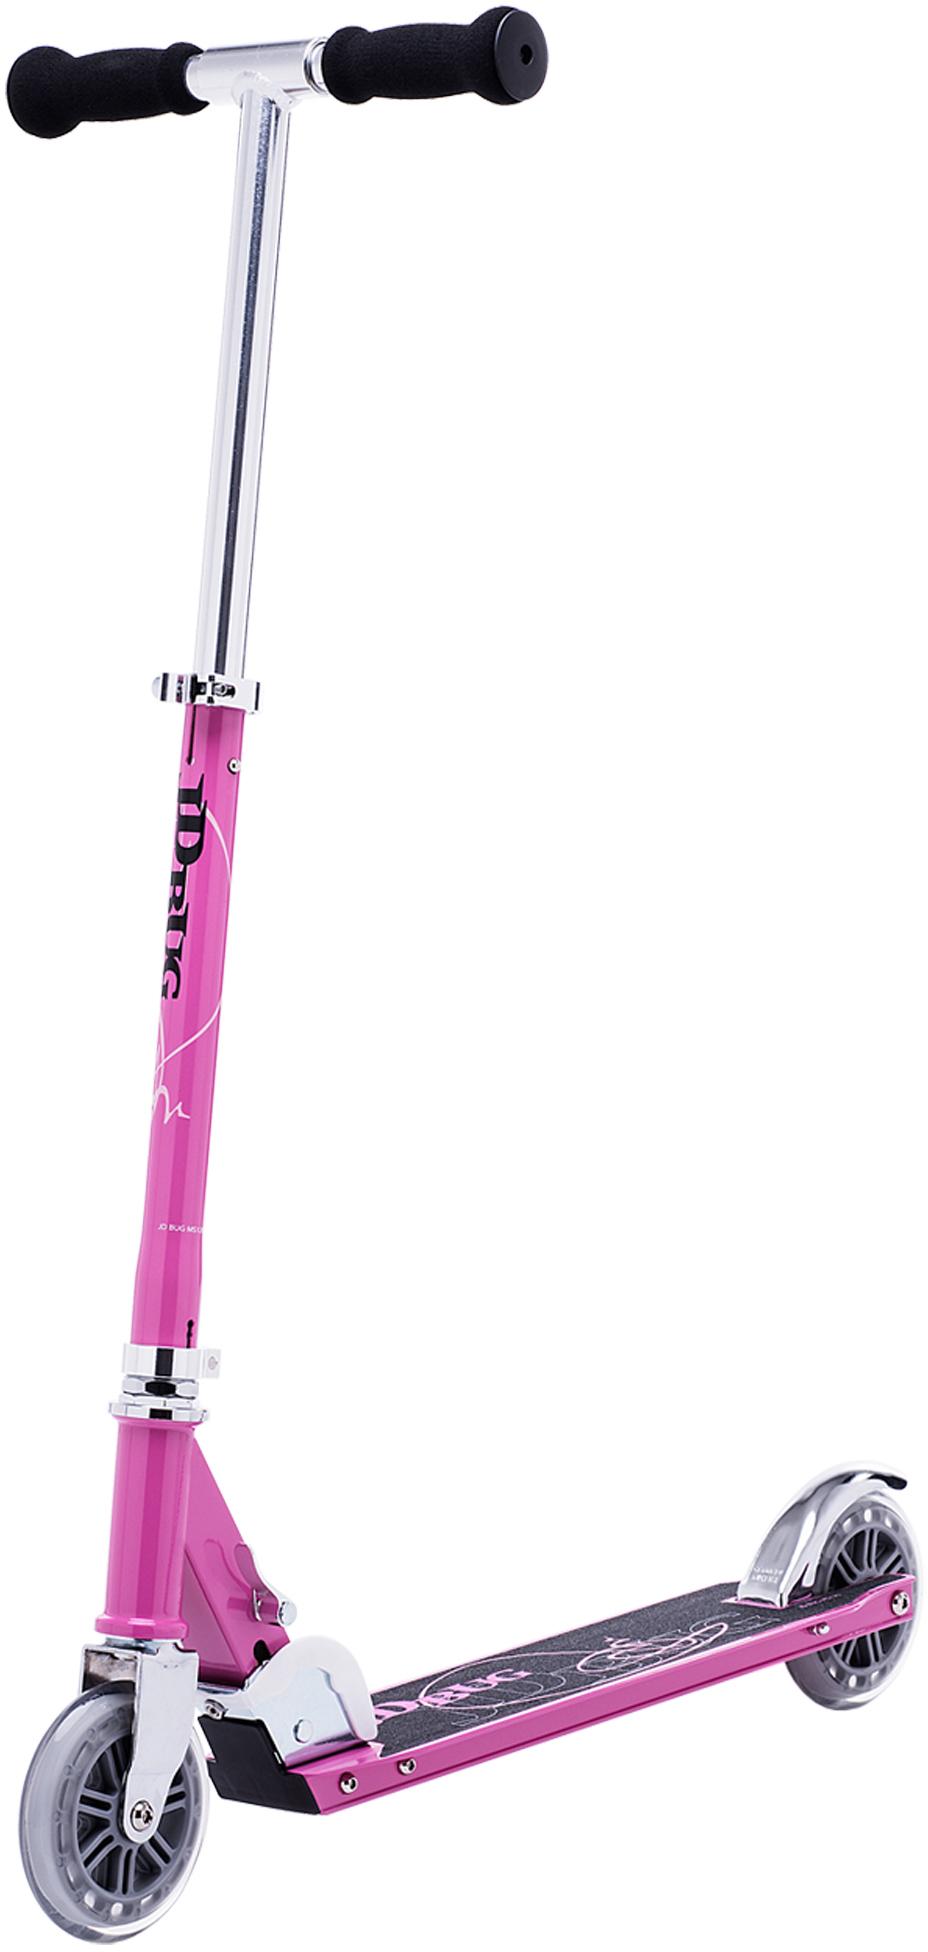 Jd Bug Classic Street 120 Scooter - Pastel Pink